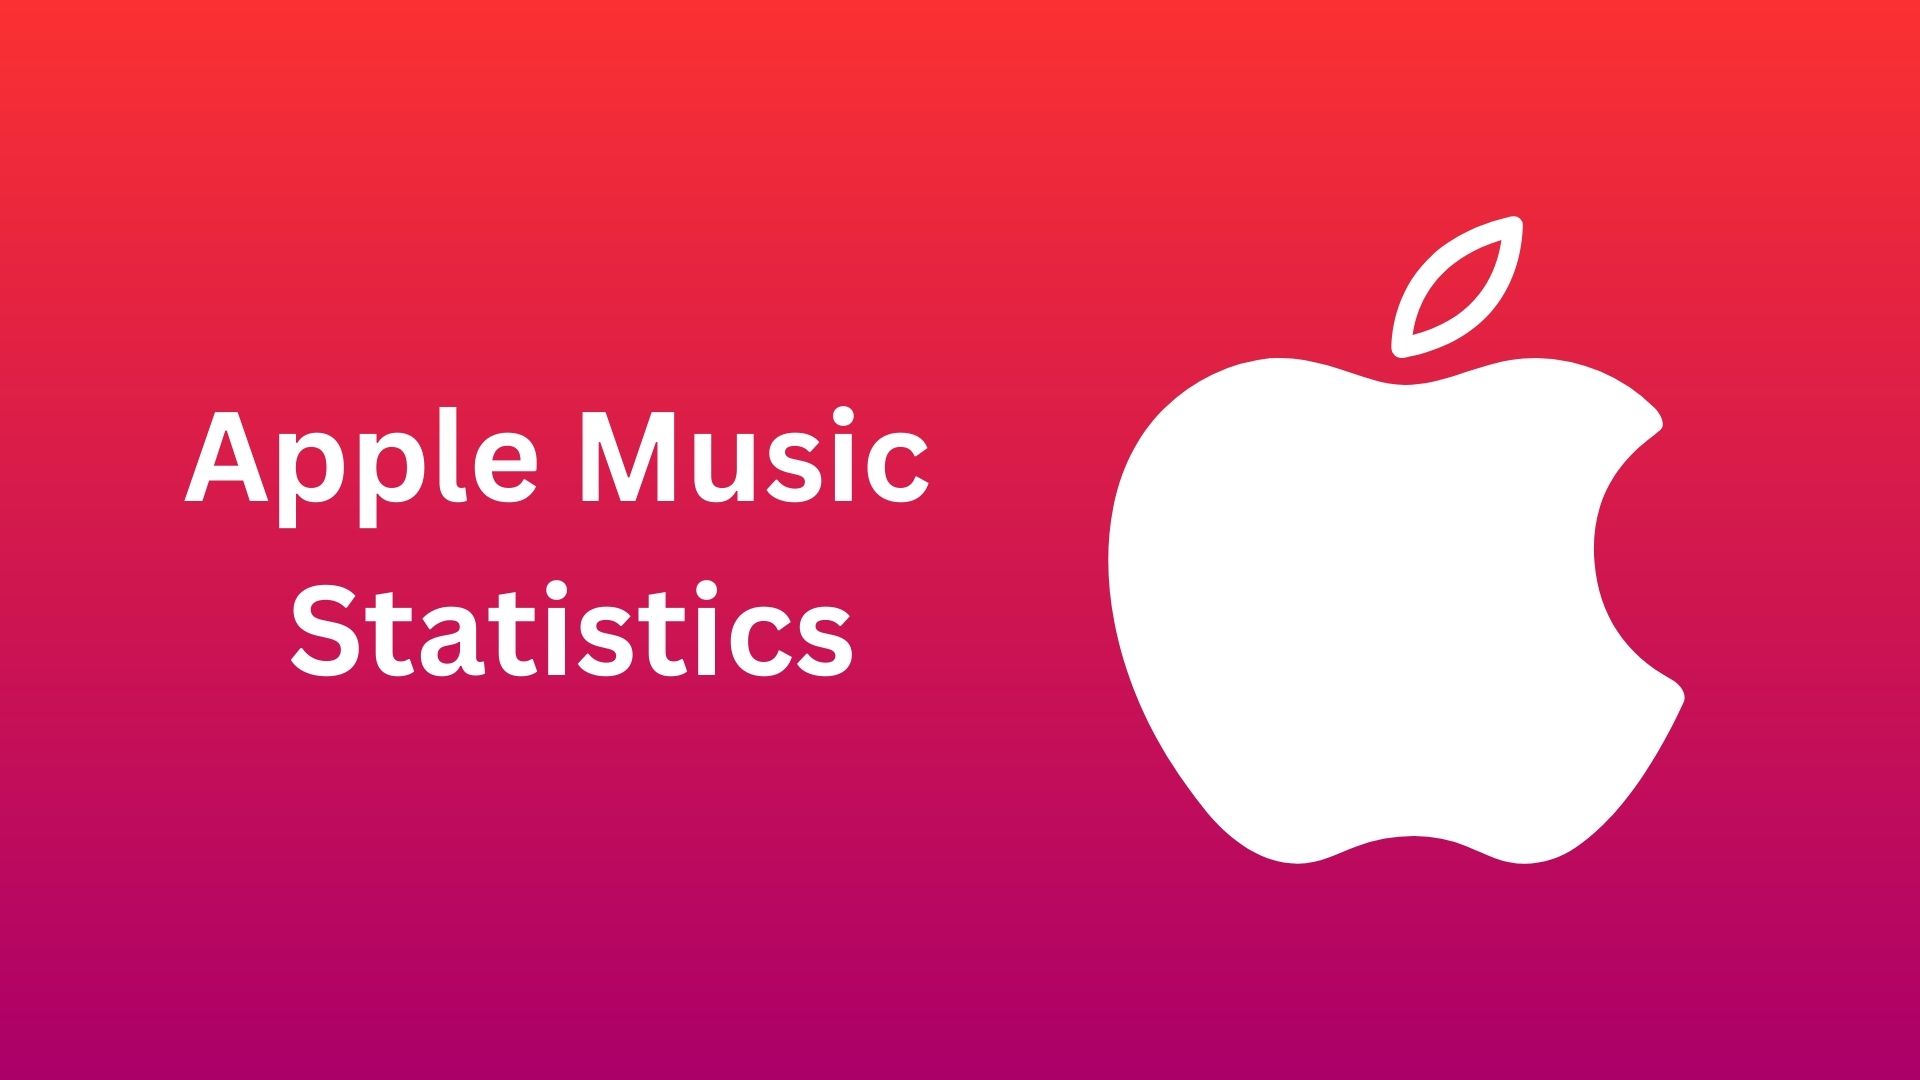 Apple Music Statistics By Cost, Region, Royalty Rates and Age